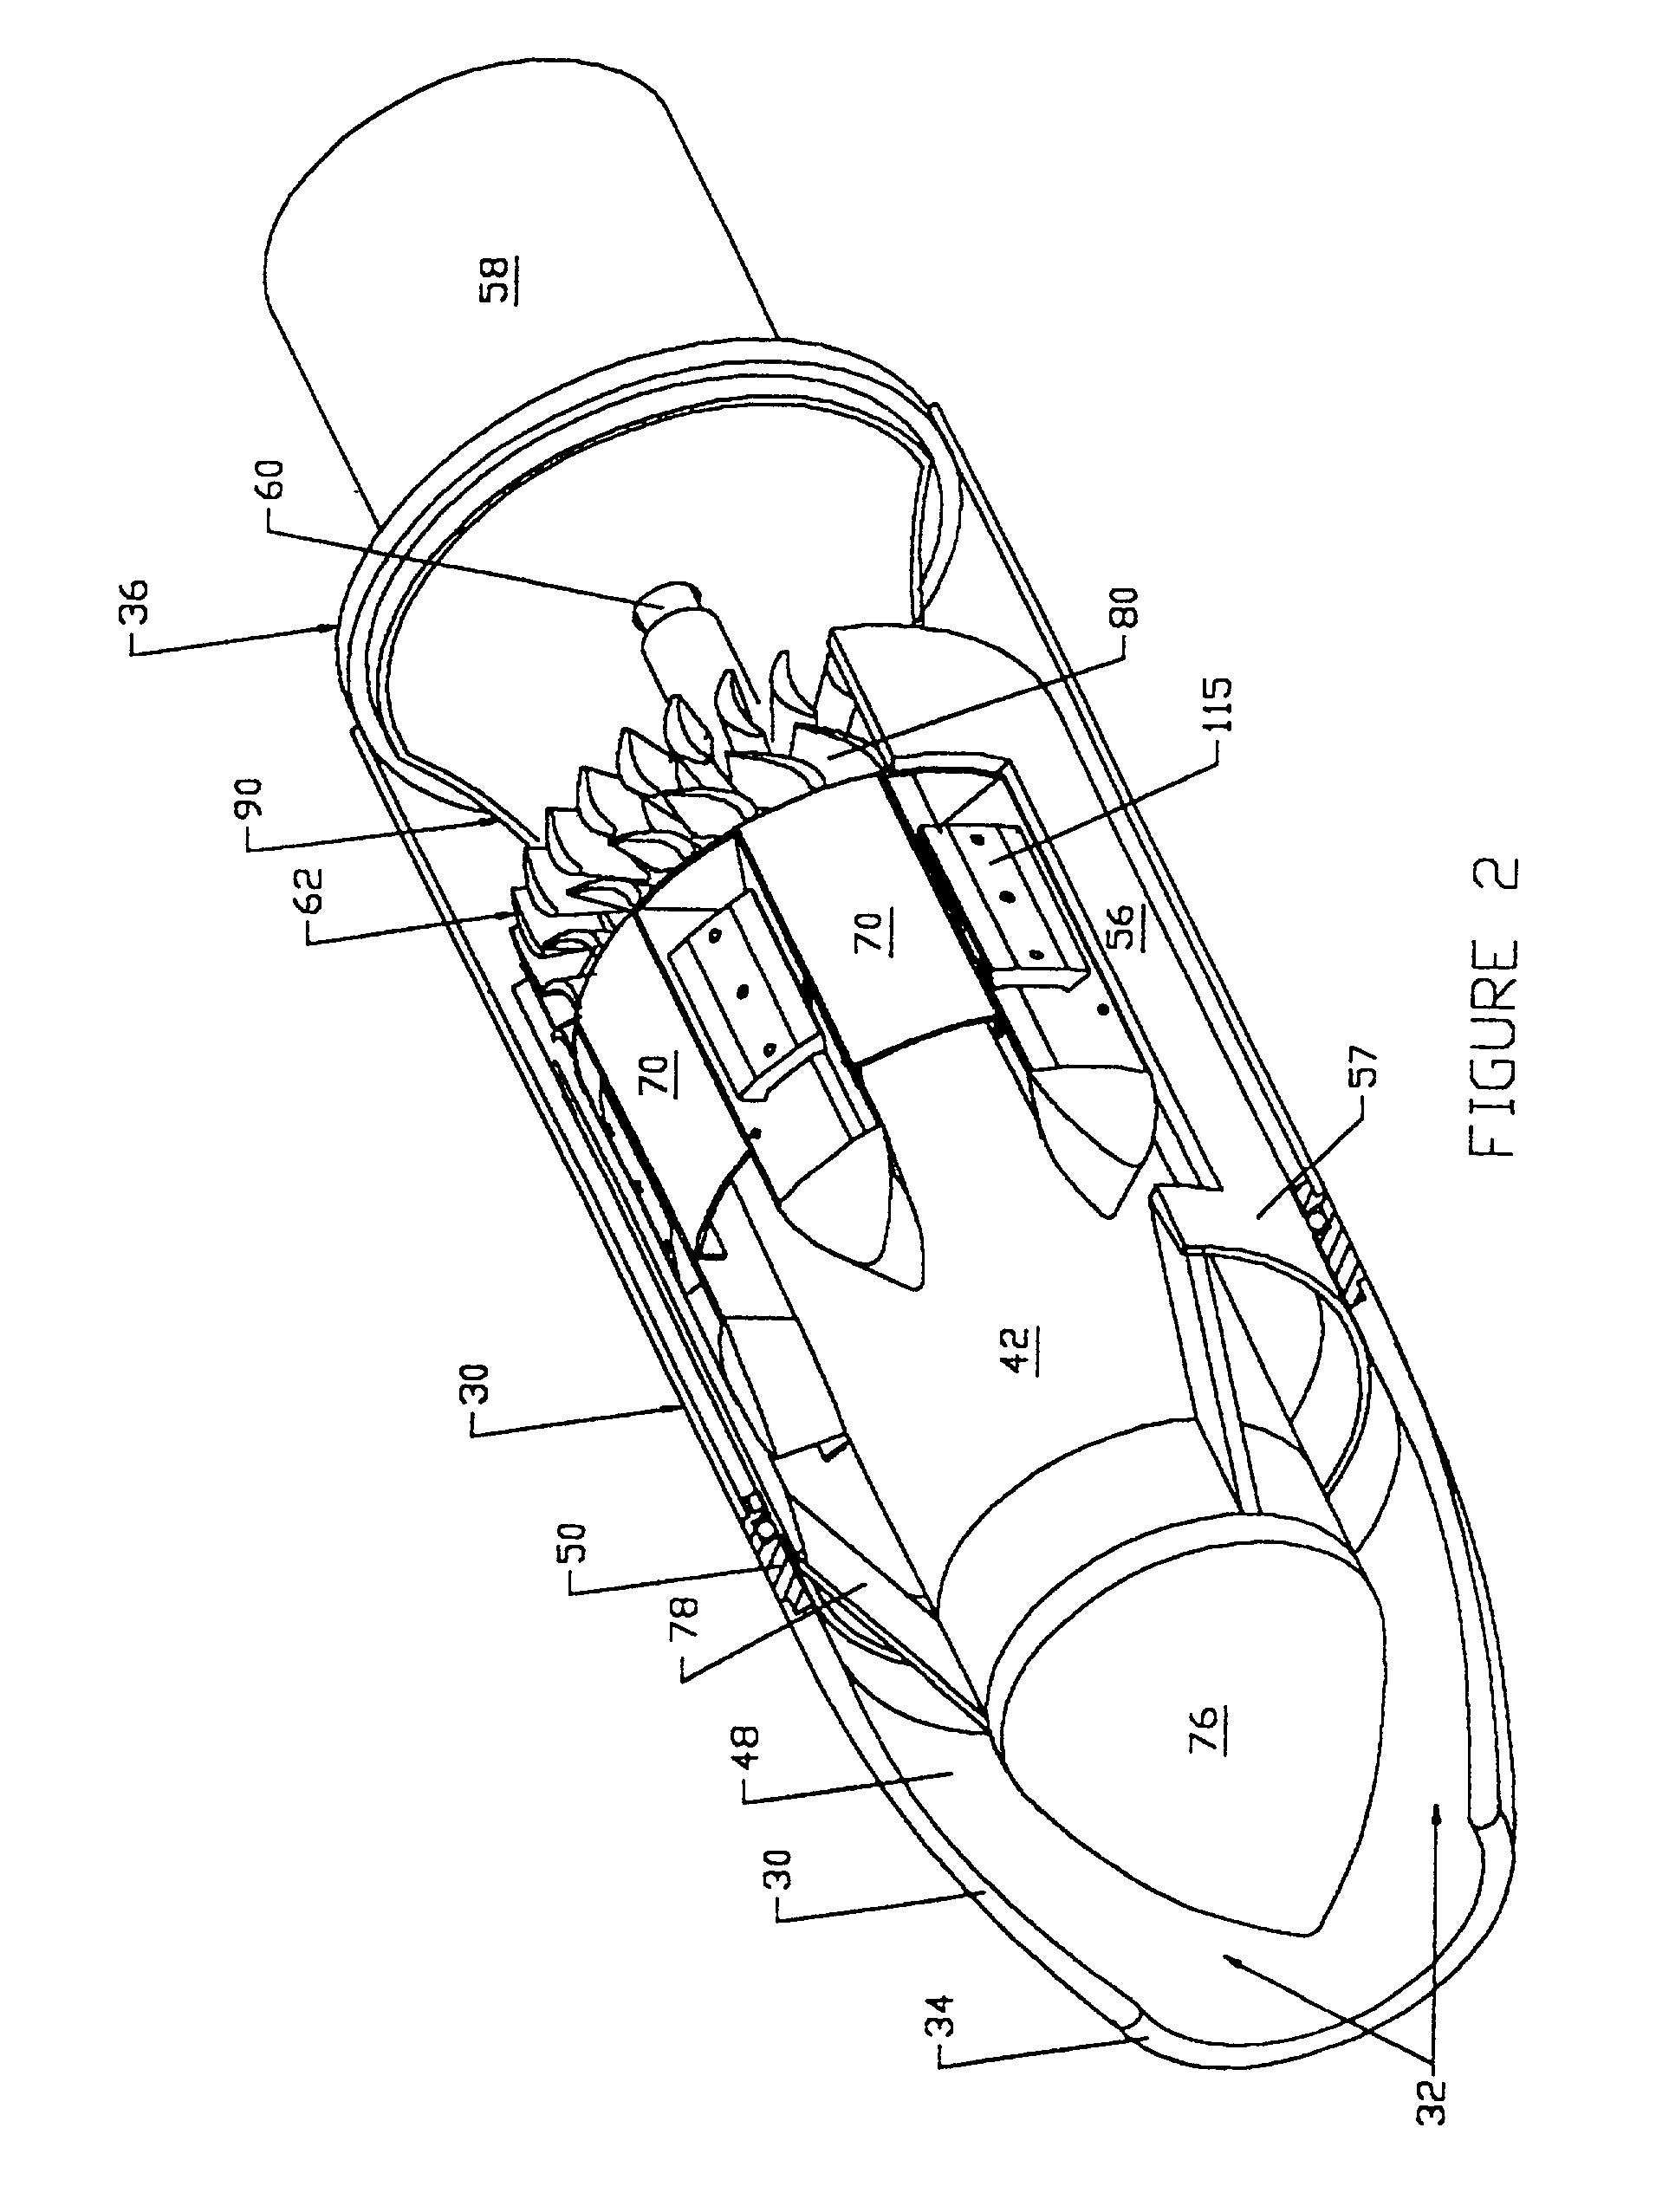 Low drag ducted ram air turbine generator and cooling system